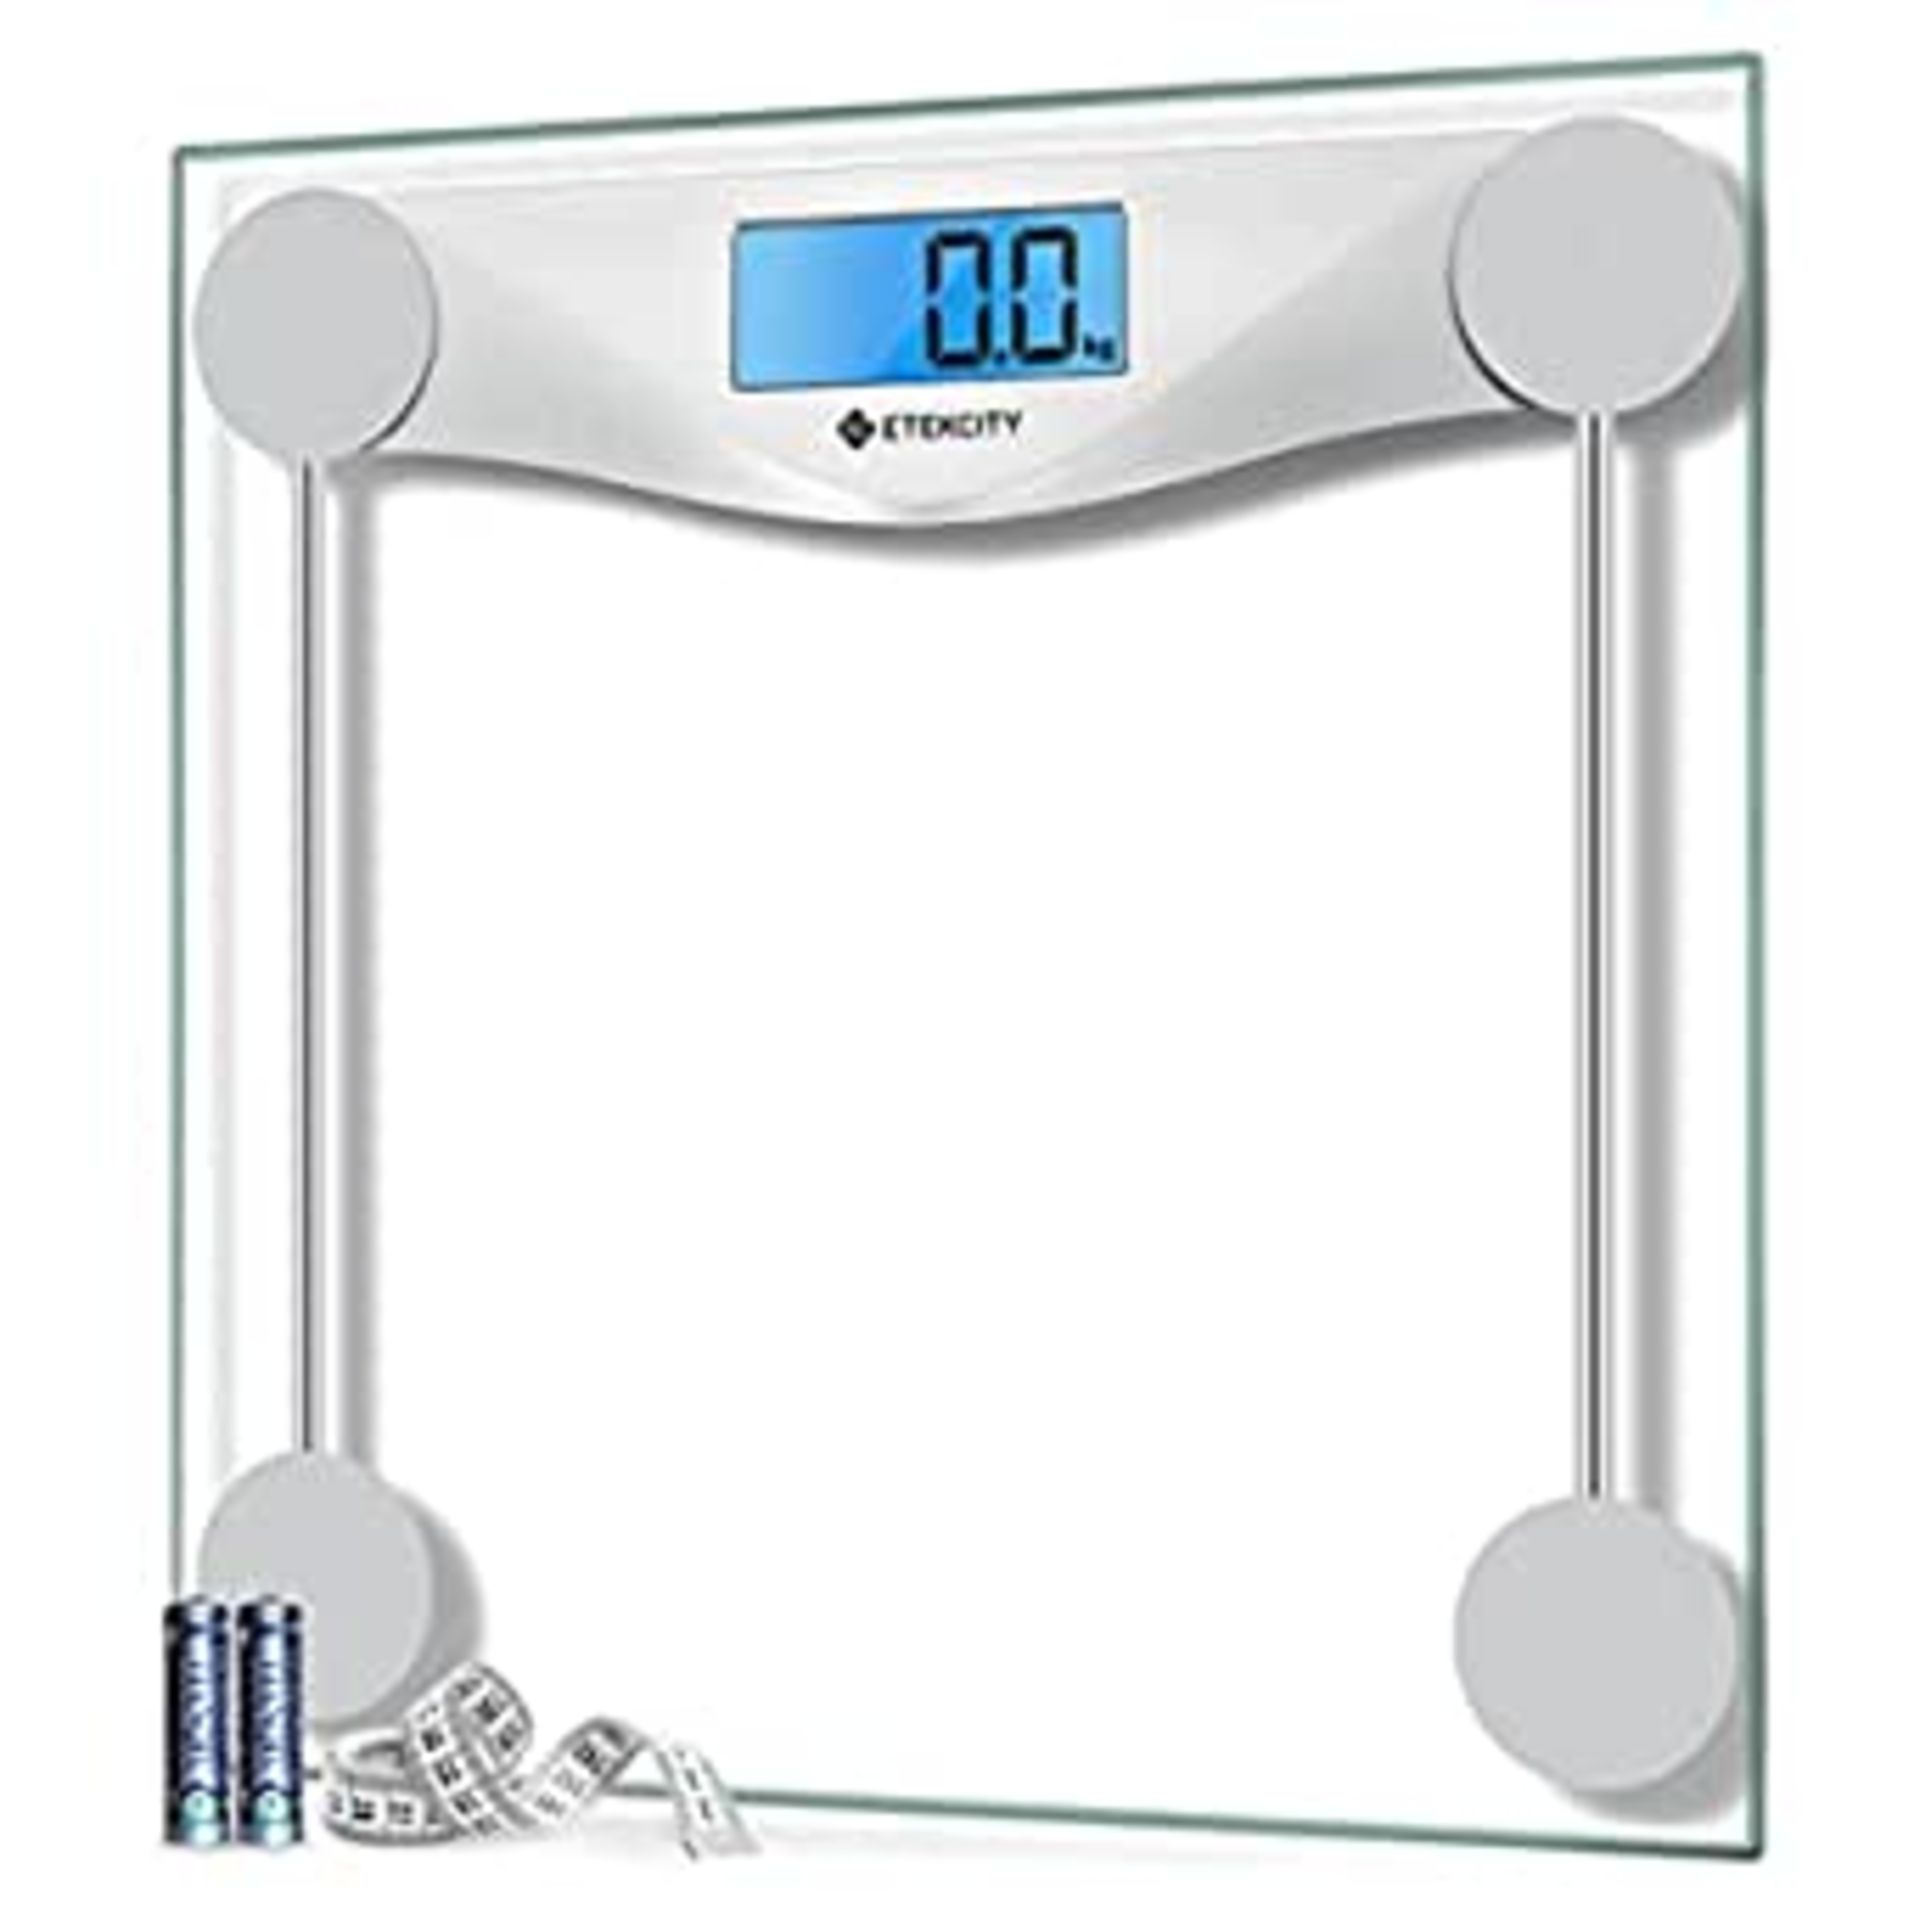 RRP - £15.99 Etekcity Scales for Body Weight, Bathroom Scale with Clear LCD Display| High-Precision